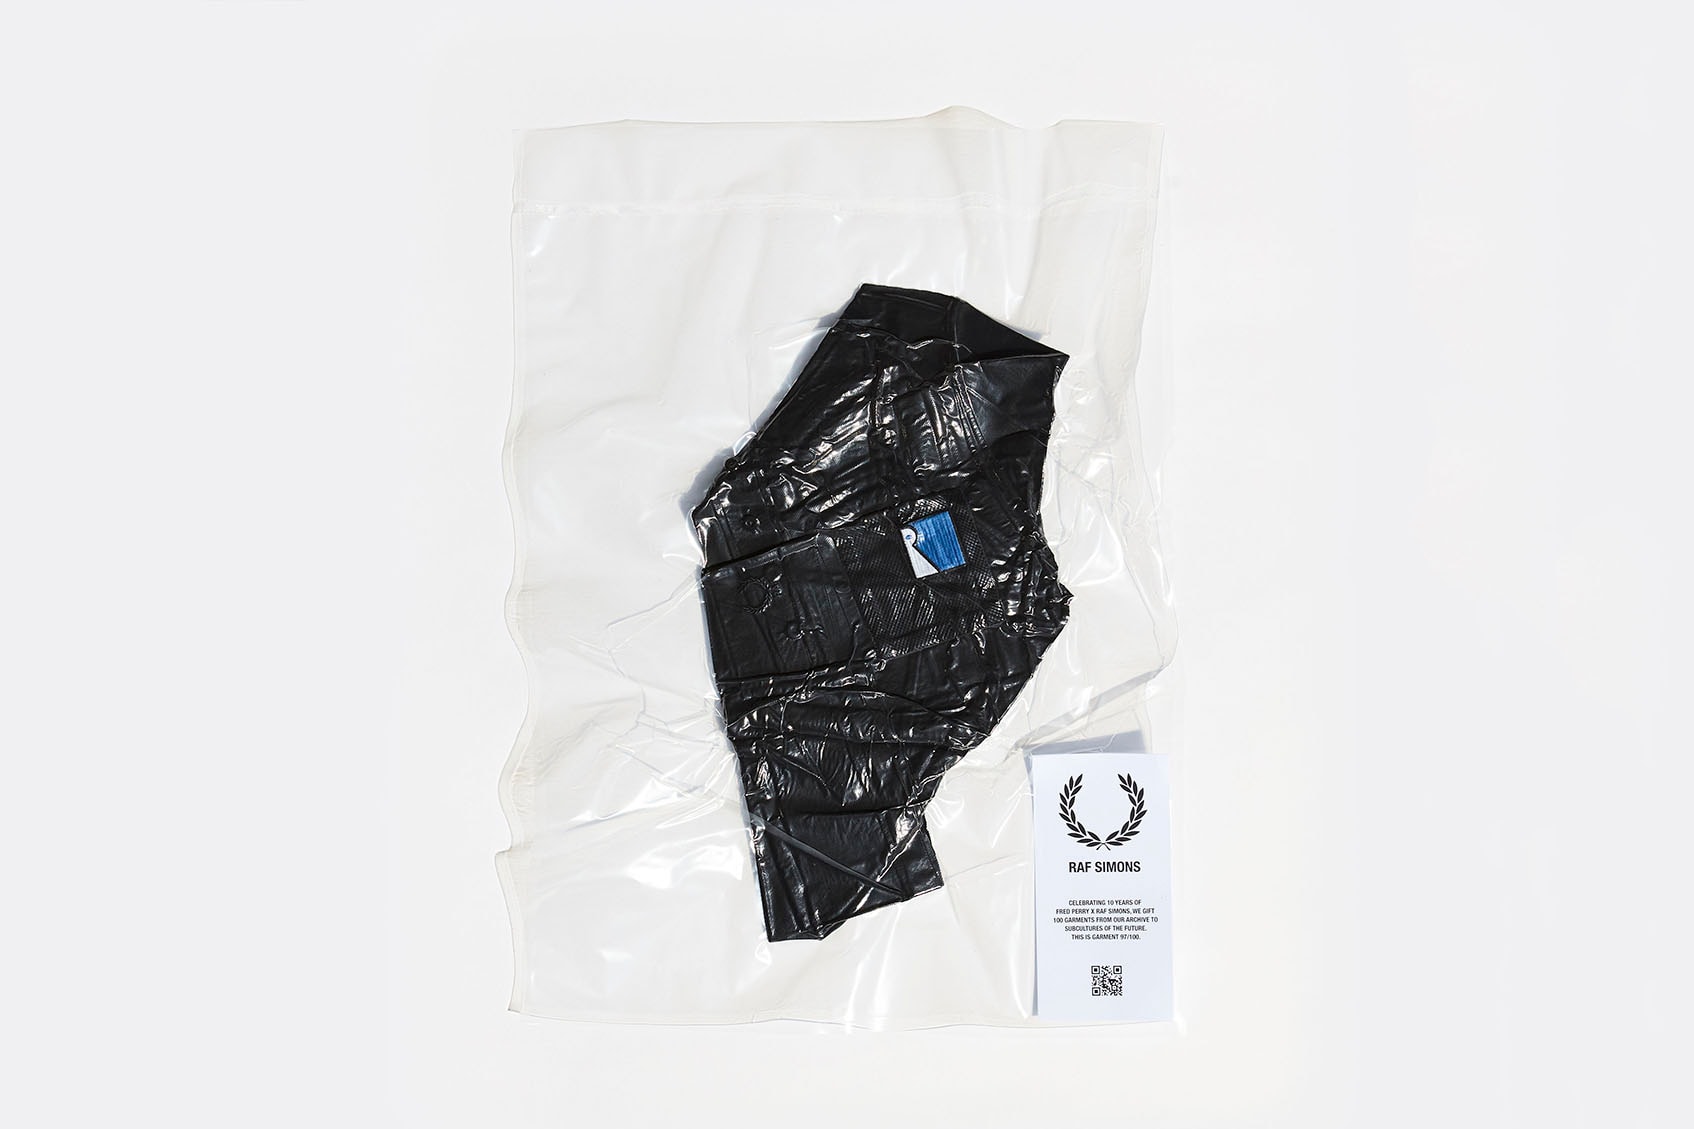 Fred Perry x Raf Simons Vacuum Sealed Garments 10 Years Athens Olya Oleinic Kyle Weeks Photography Project Subculture Youth Culture